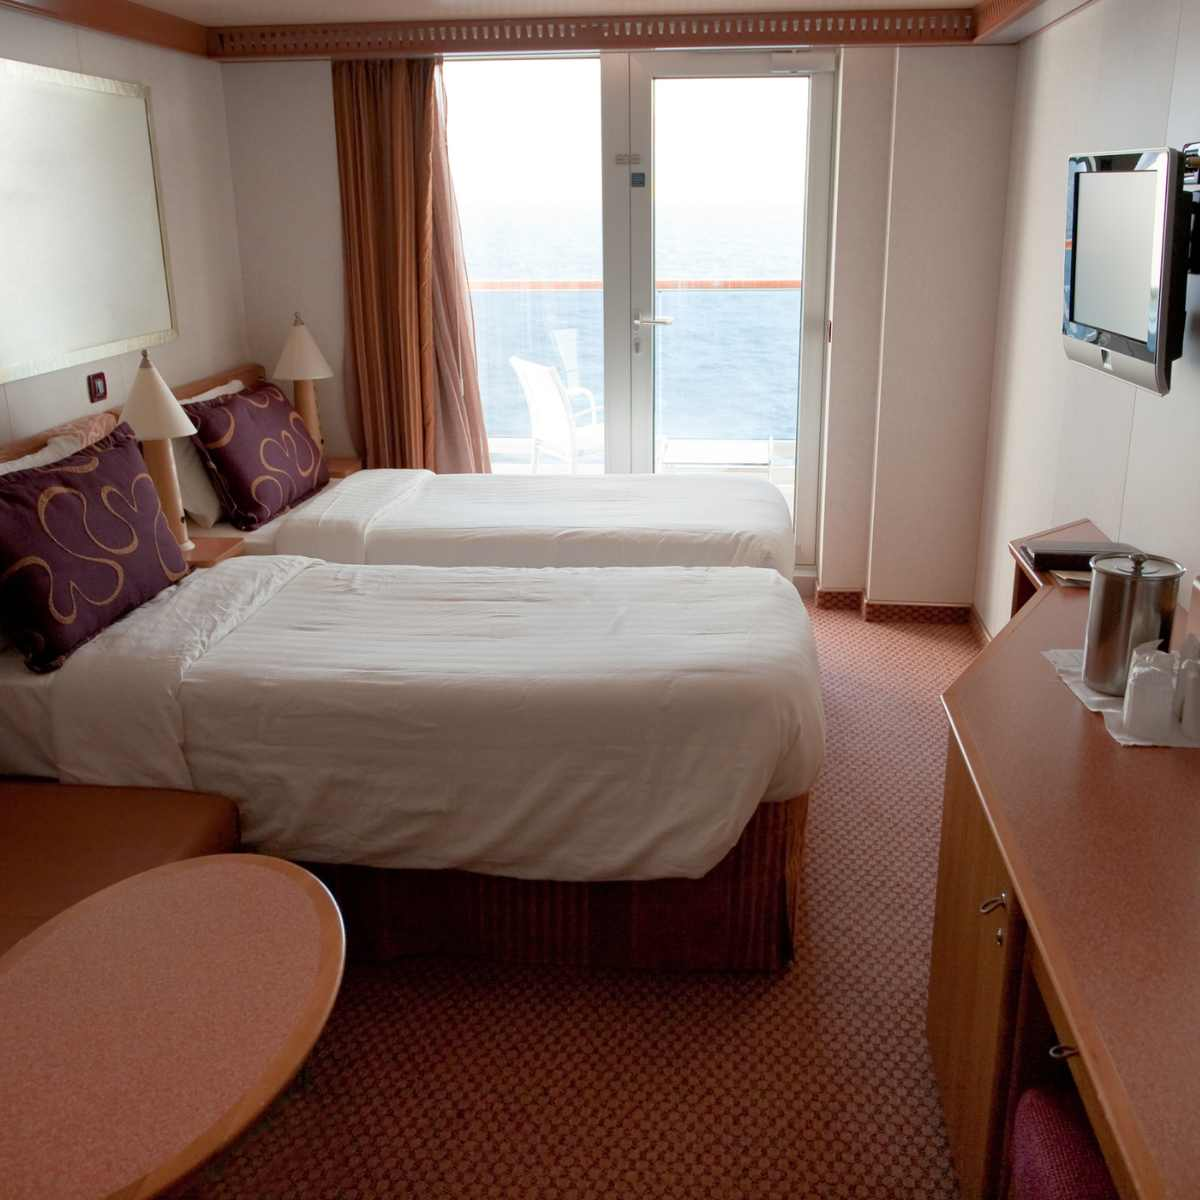 Which cruise ship cabins are best? Forward or aft cabins?